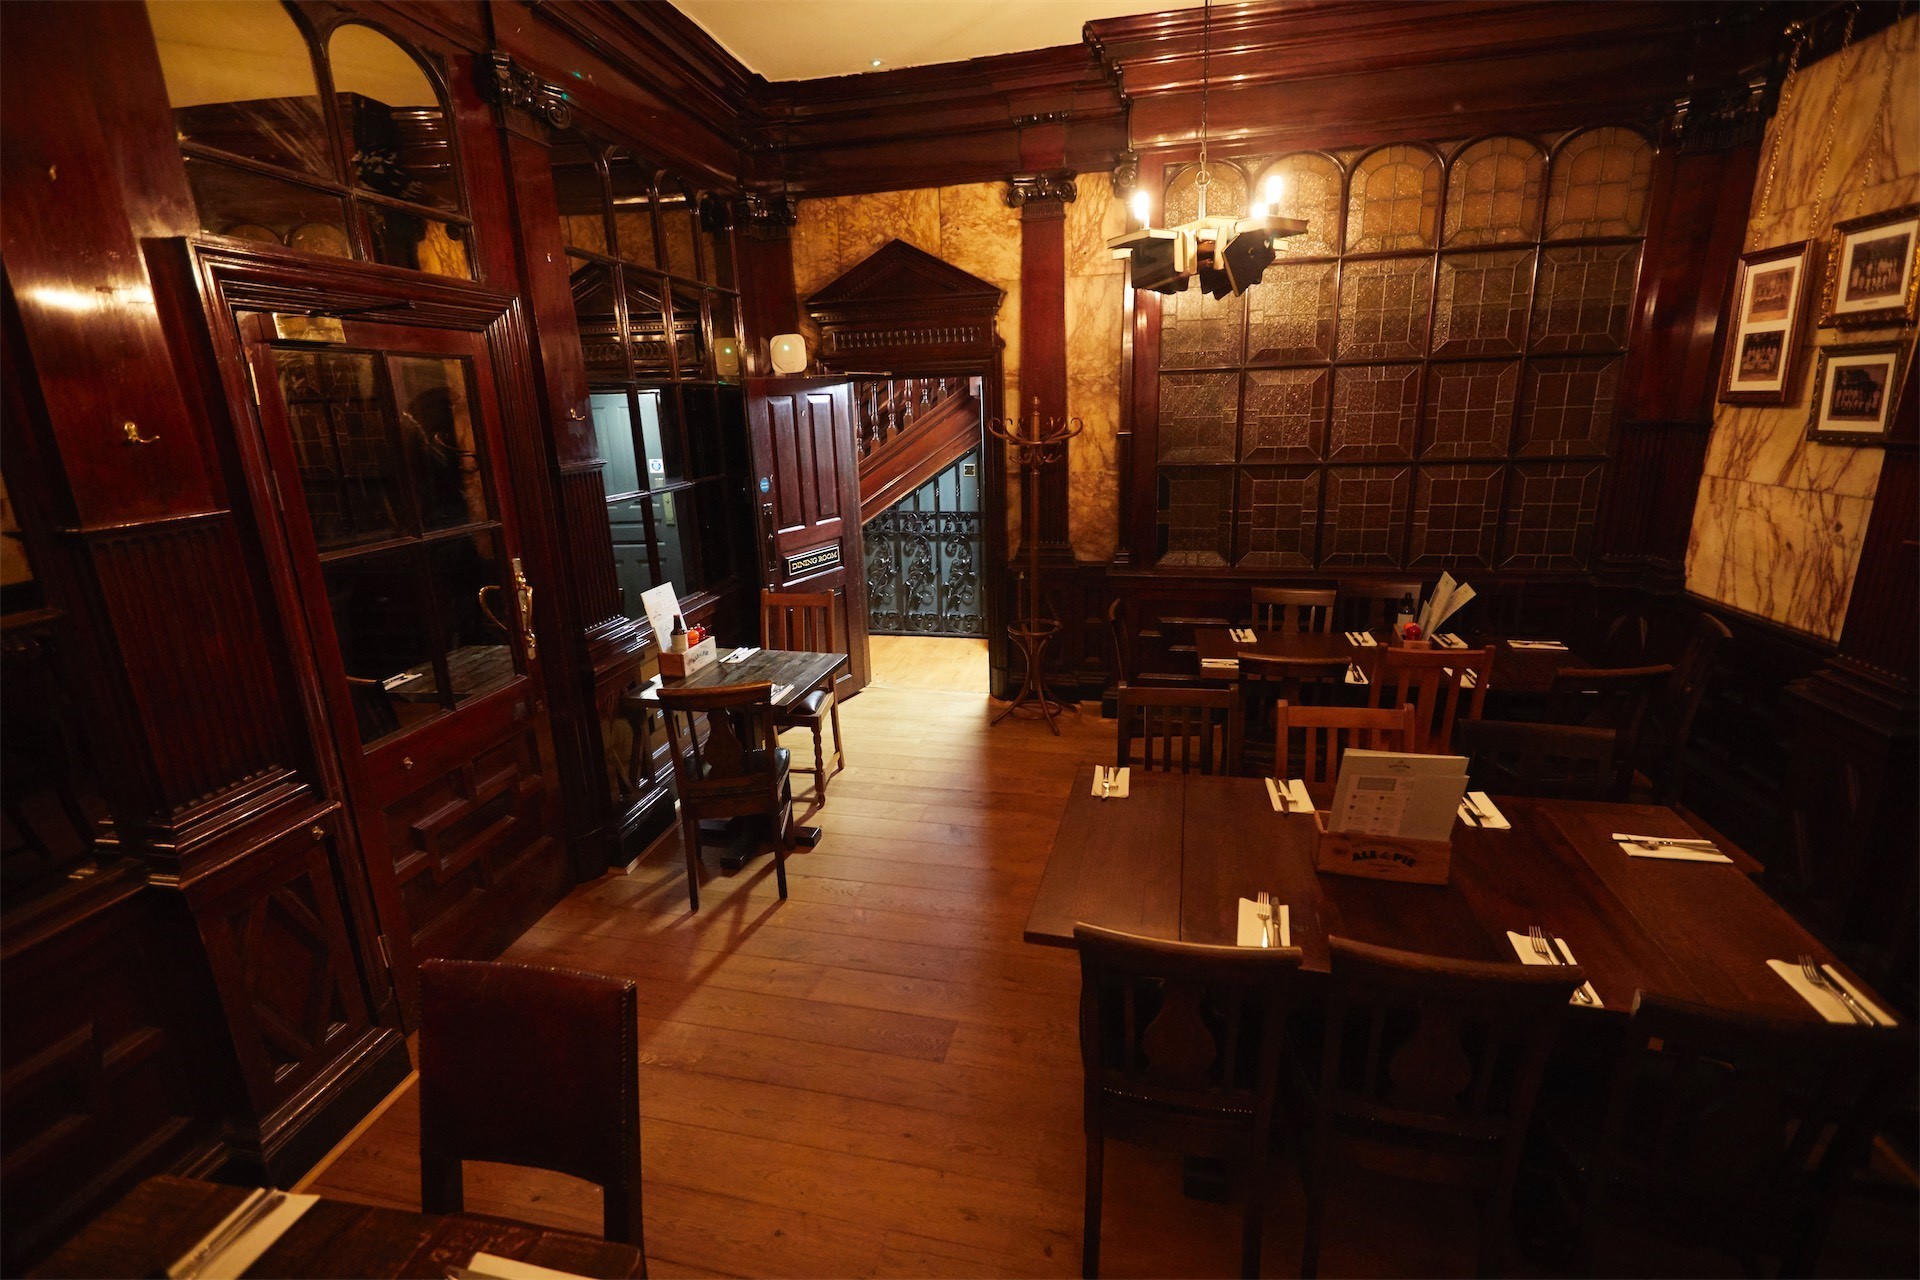 The Dining Room Room at The Counting House